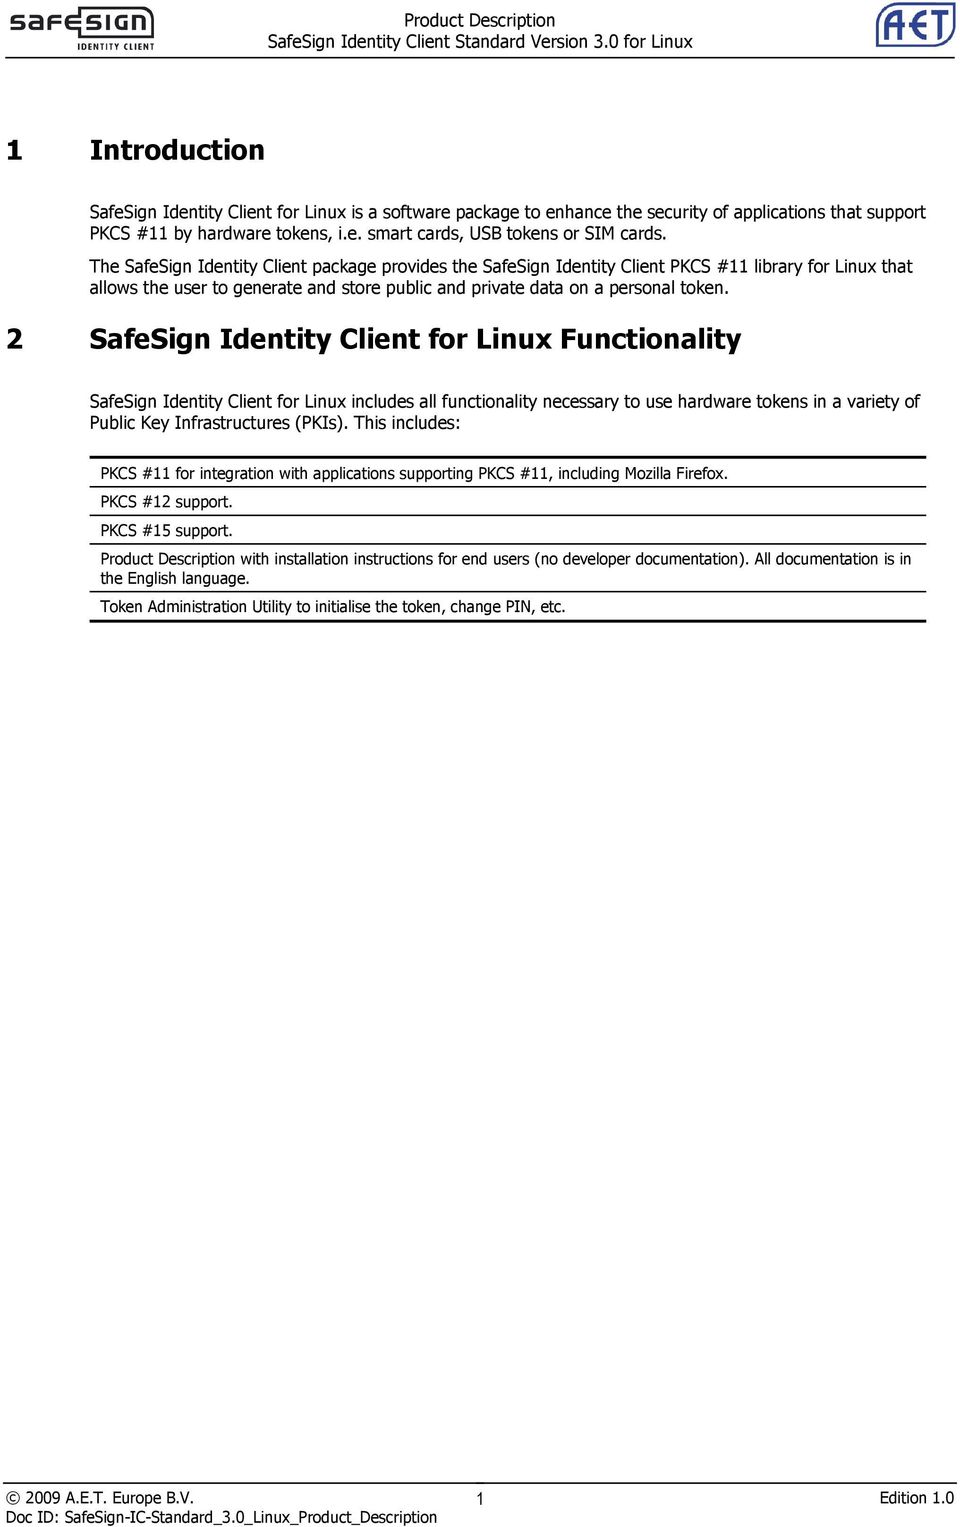 2 SafeSign Identity Client for Linux Functionality SafeSign Identity Client for Linux includes all functionality necessary to use hardware tokens in a variety of Public Key Infrastructures (PKIs).